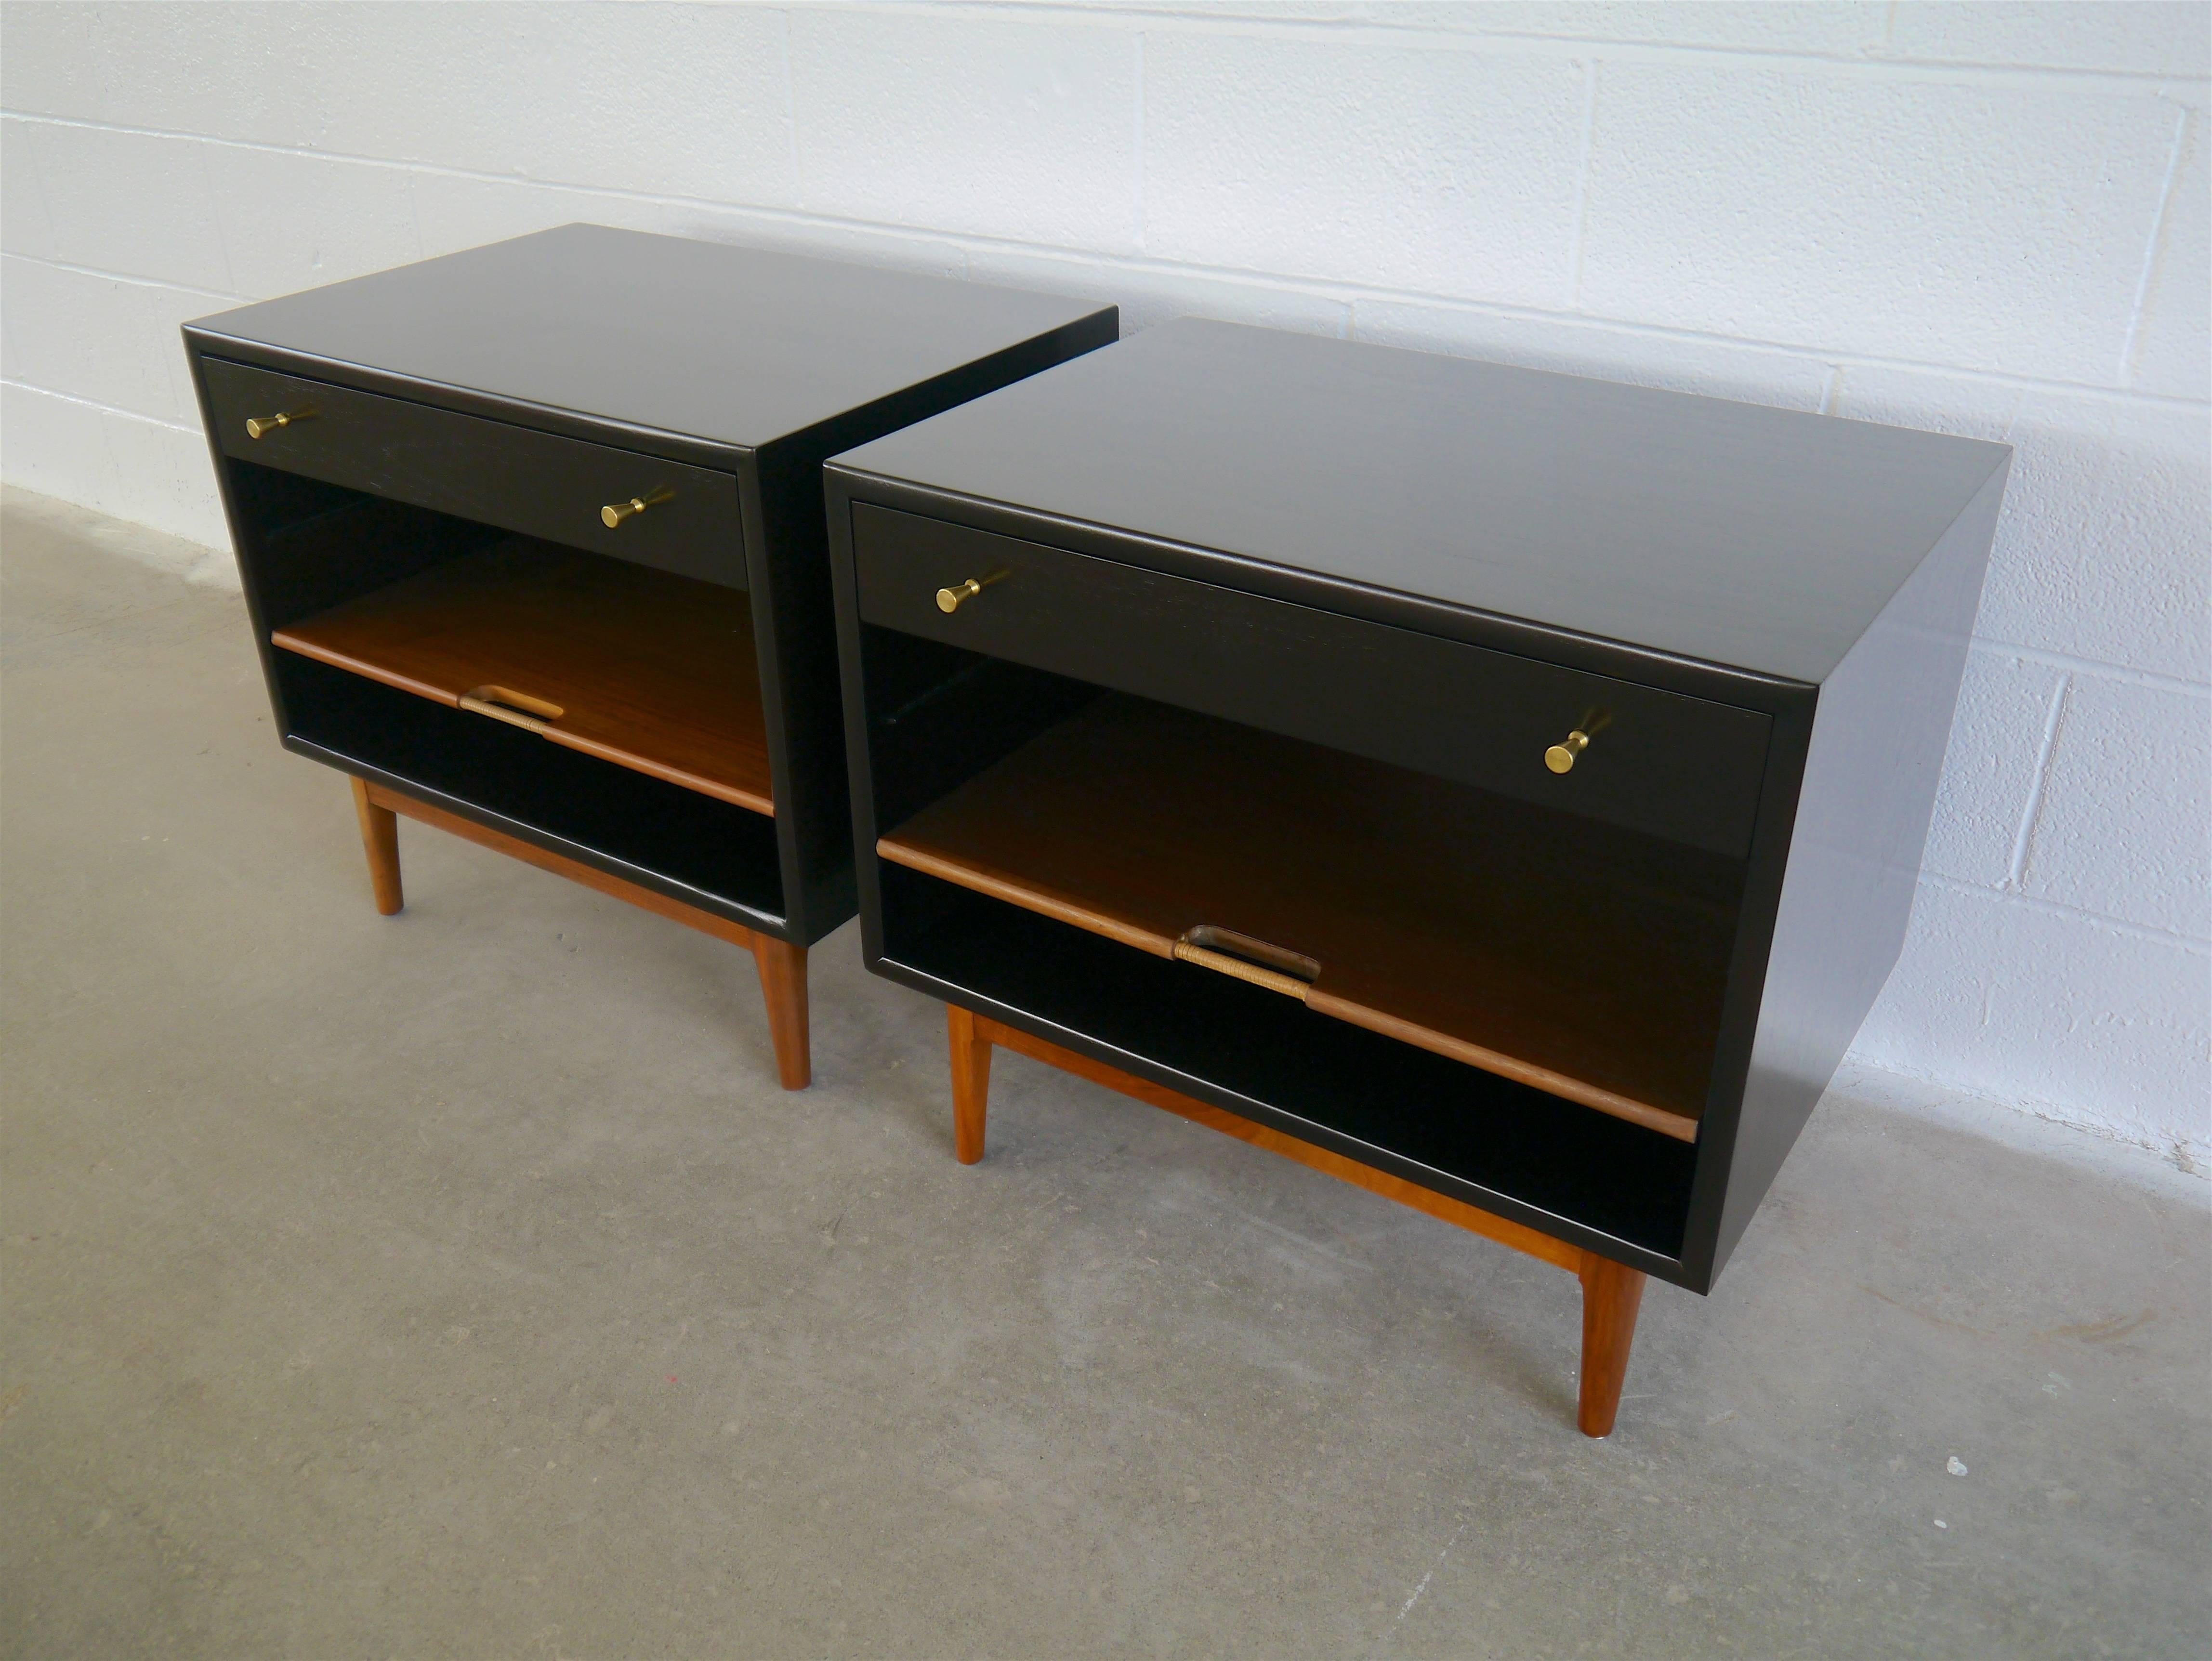 Nightstands in walnut by Kipp Stewart. These large nightstands have drawers and an adjustable sliding shelf with raffia handles. The pulls are solid machined brass. We borrowed the finish from Dunbar pieces of the period, the cases done in dark